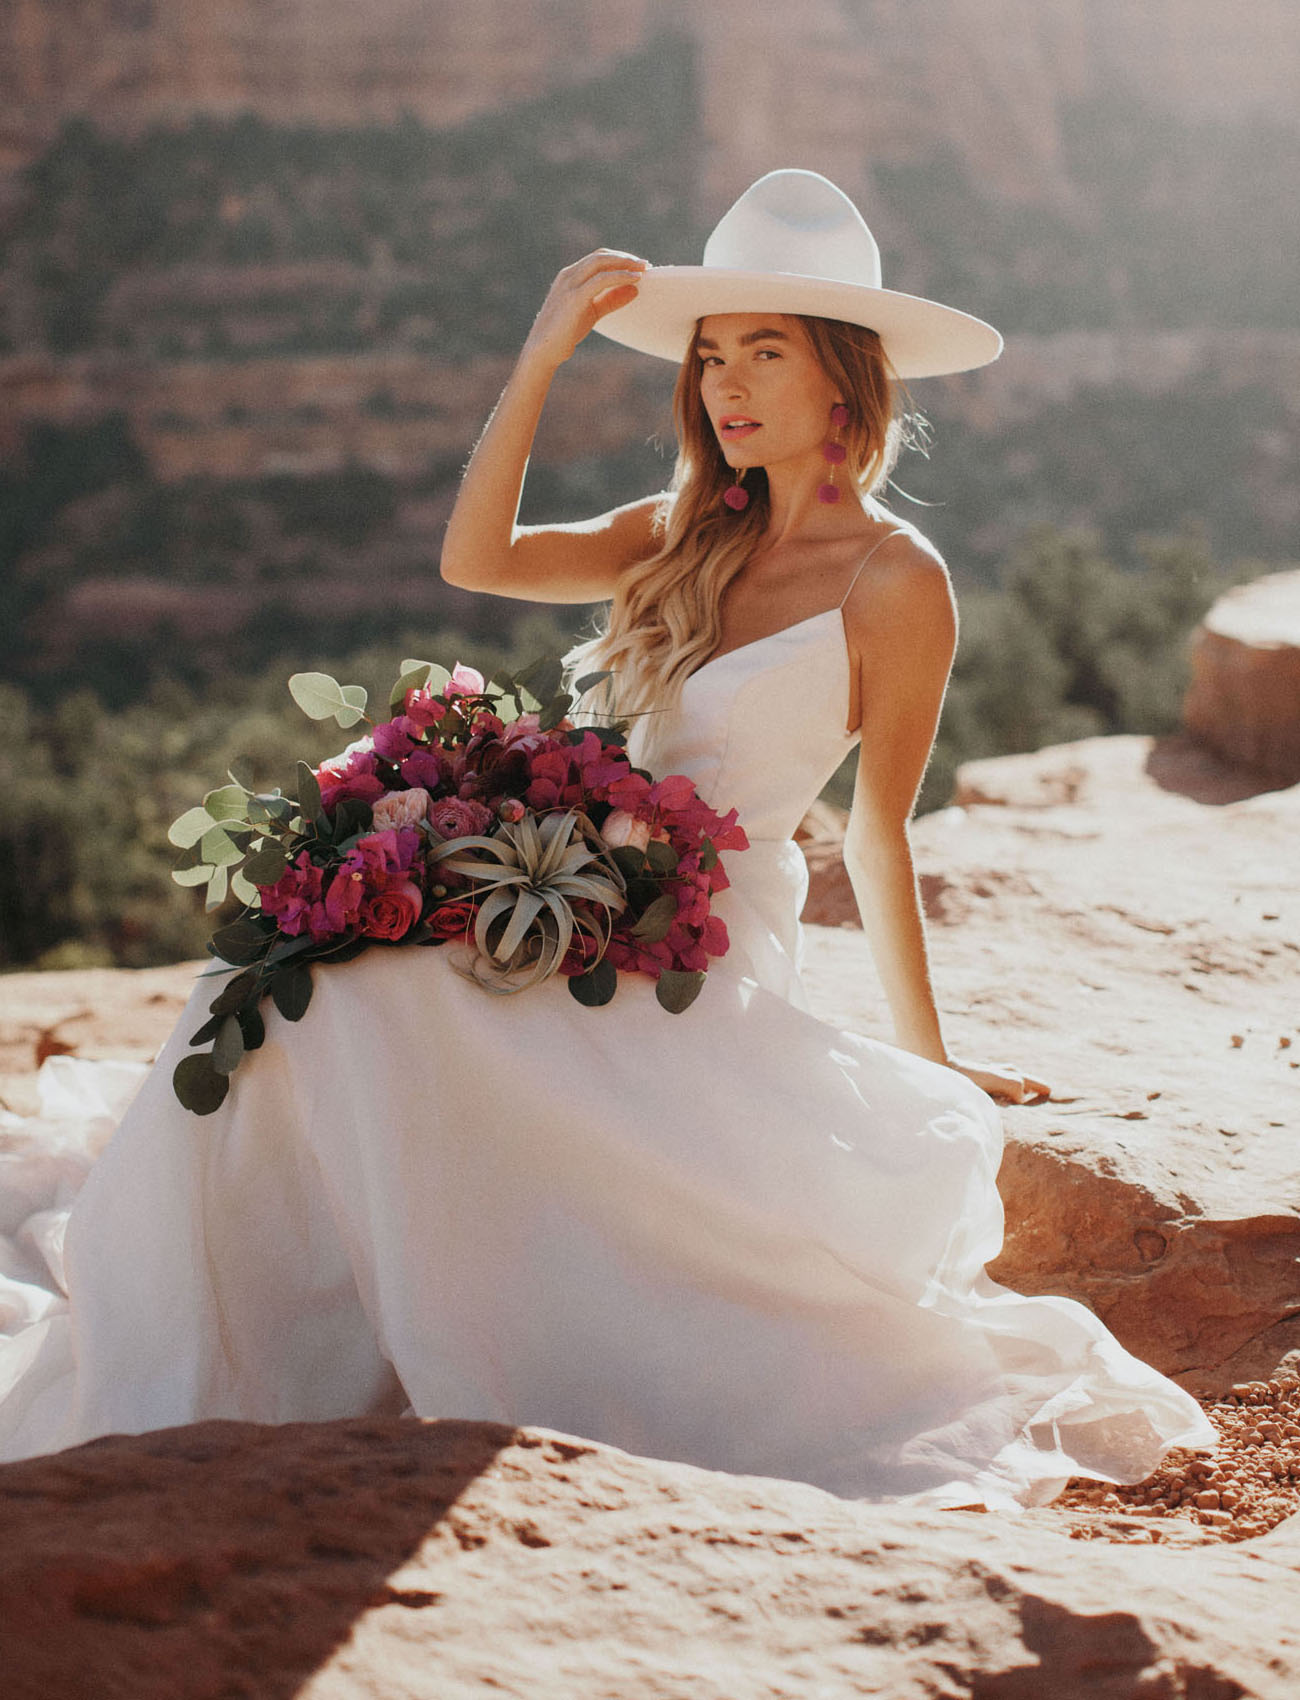 Trending Now: Modern Bridal Hats for Your Wedding Day | Green Wedding Shoes